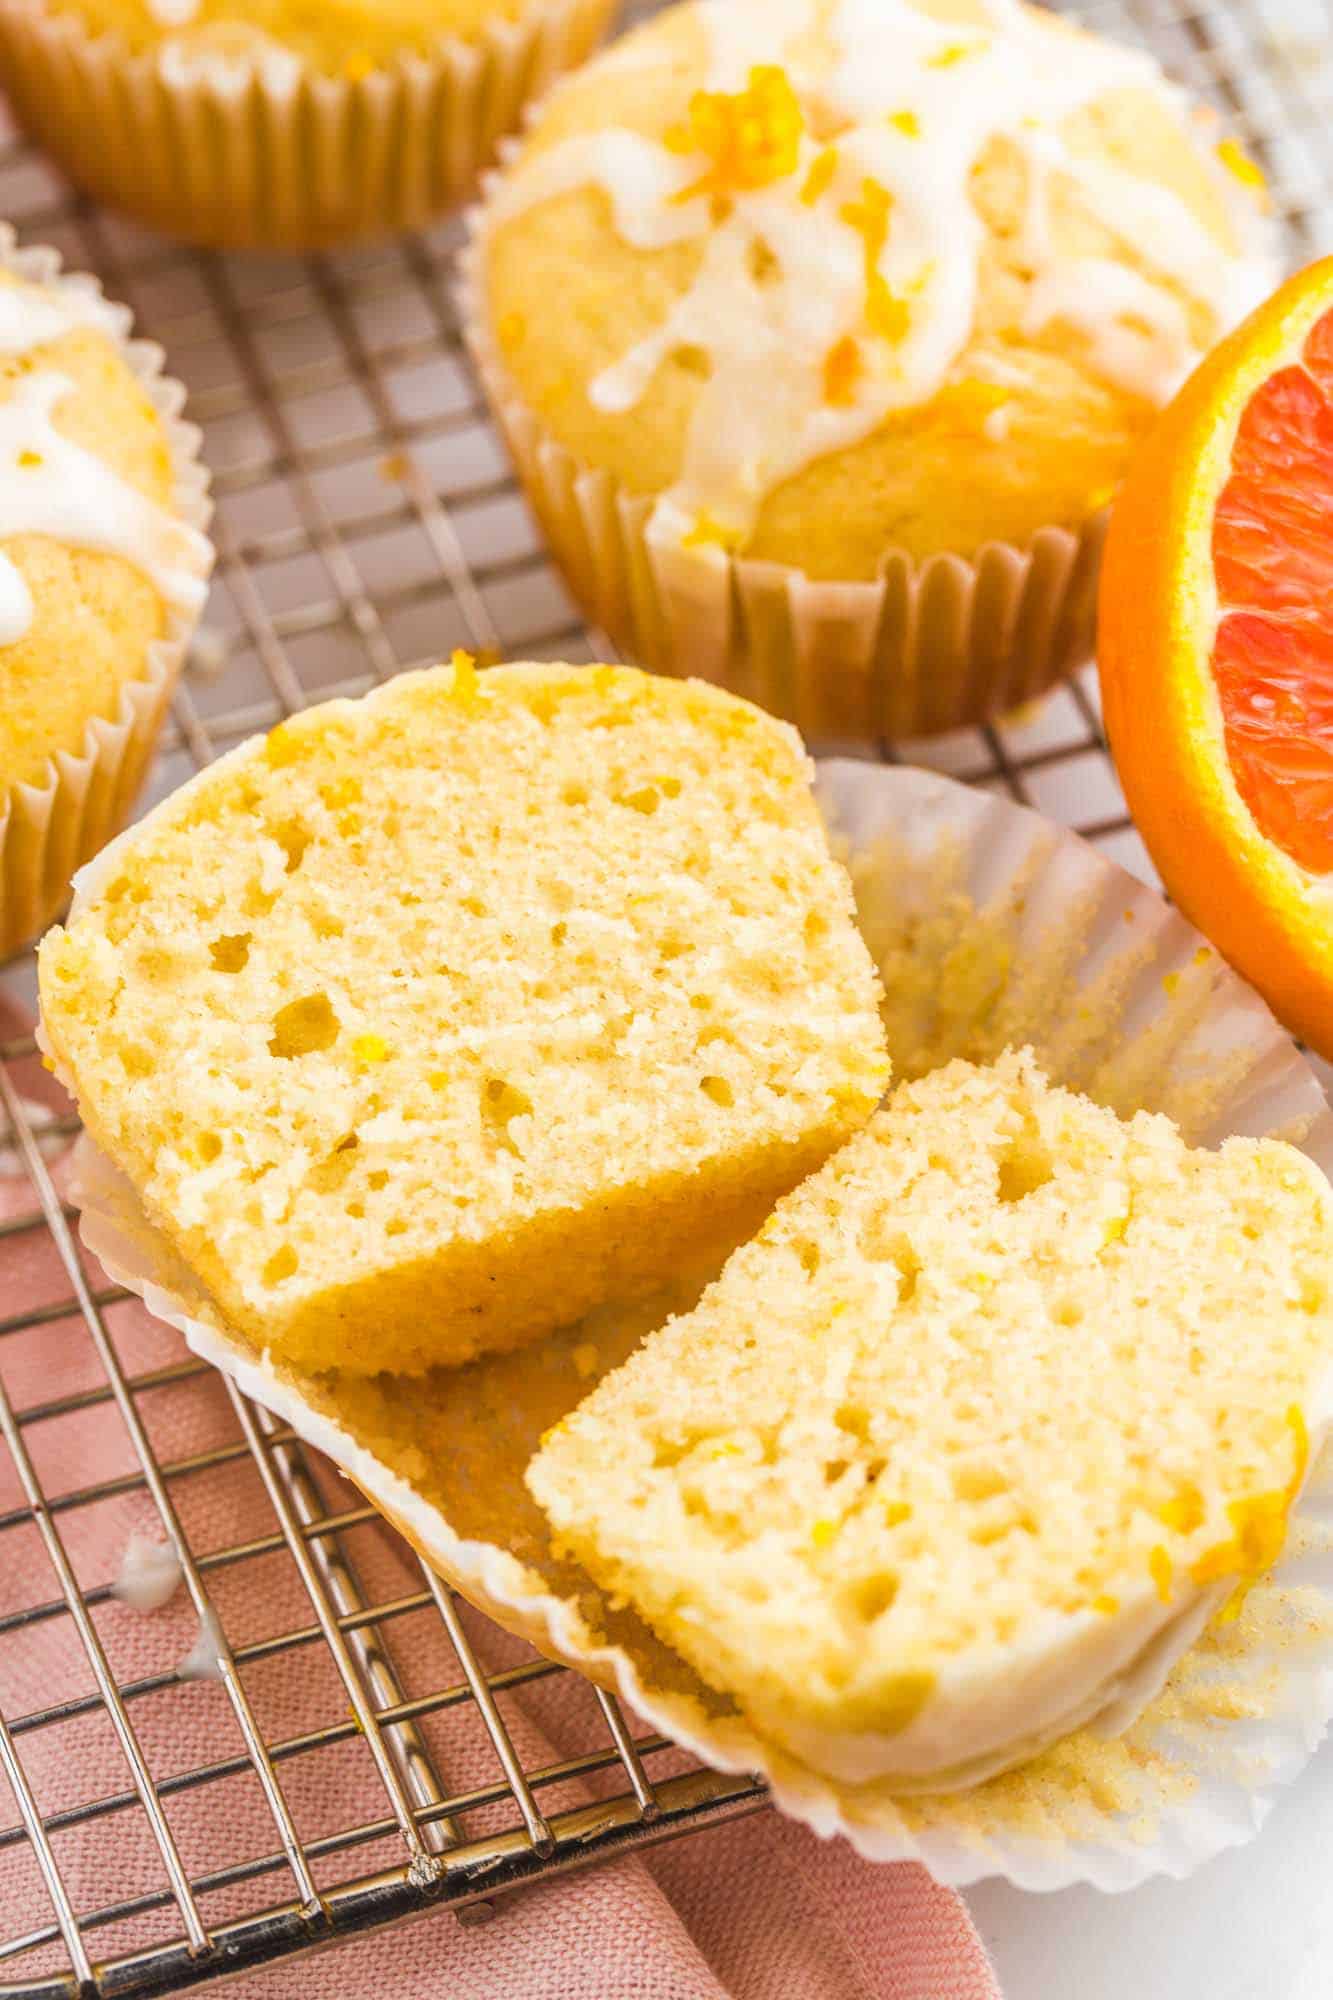 An orange muffin sliced in the middle to show the texture